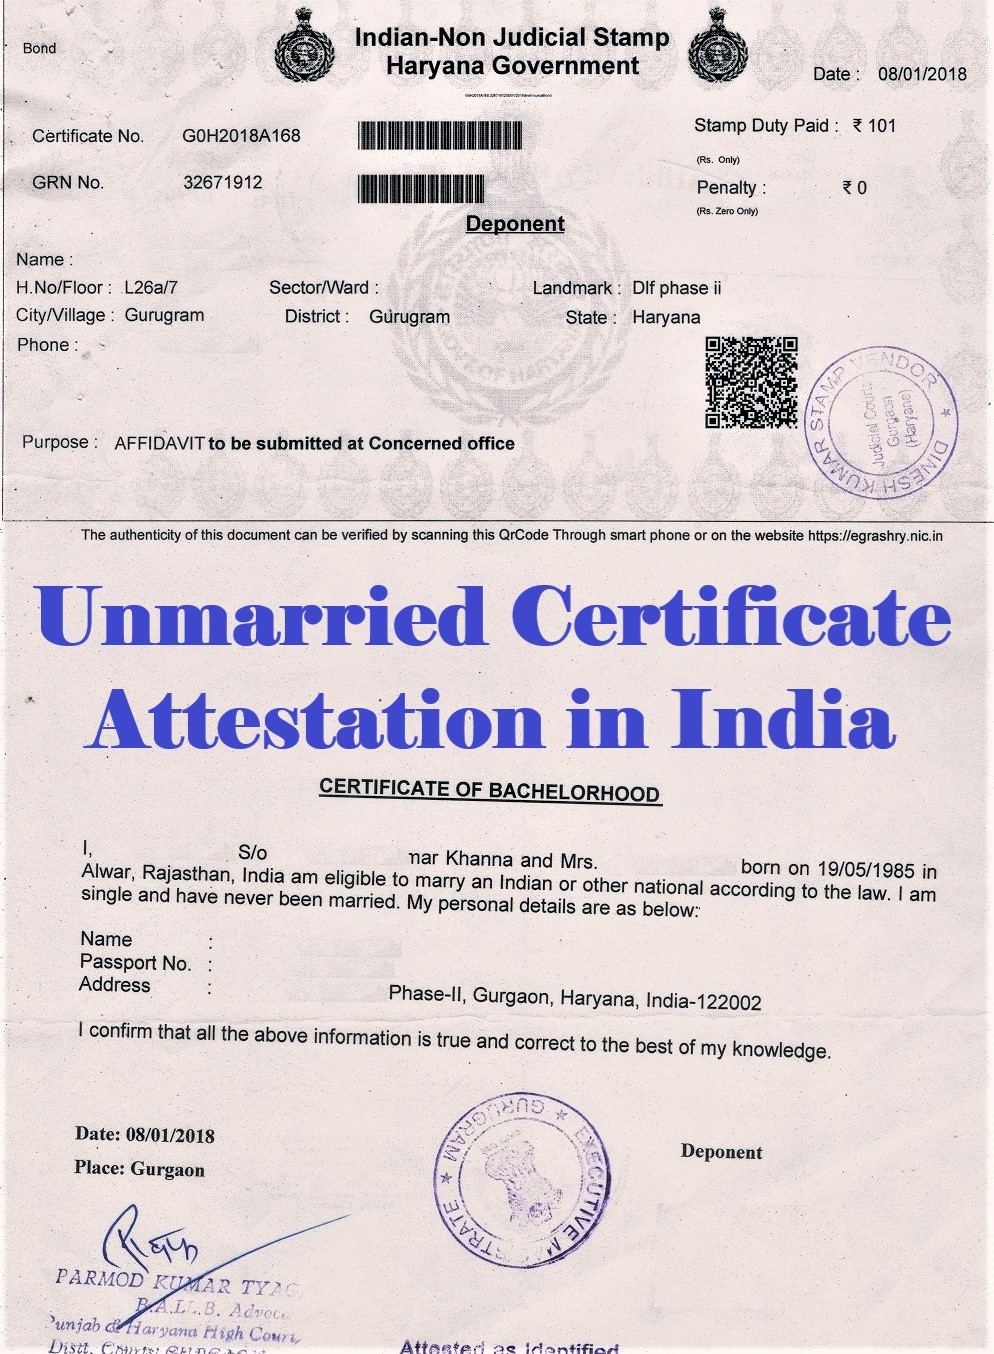 Unmarried Certificate Attestation from Malawi Embassy